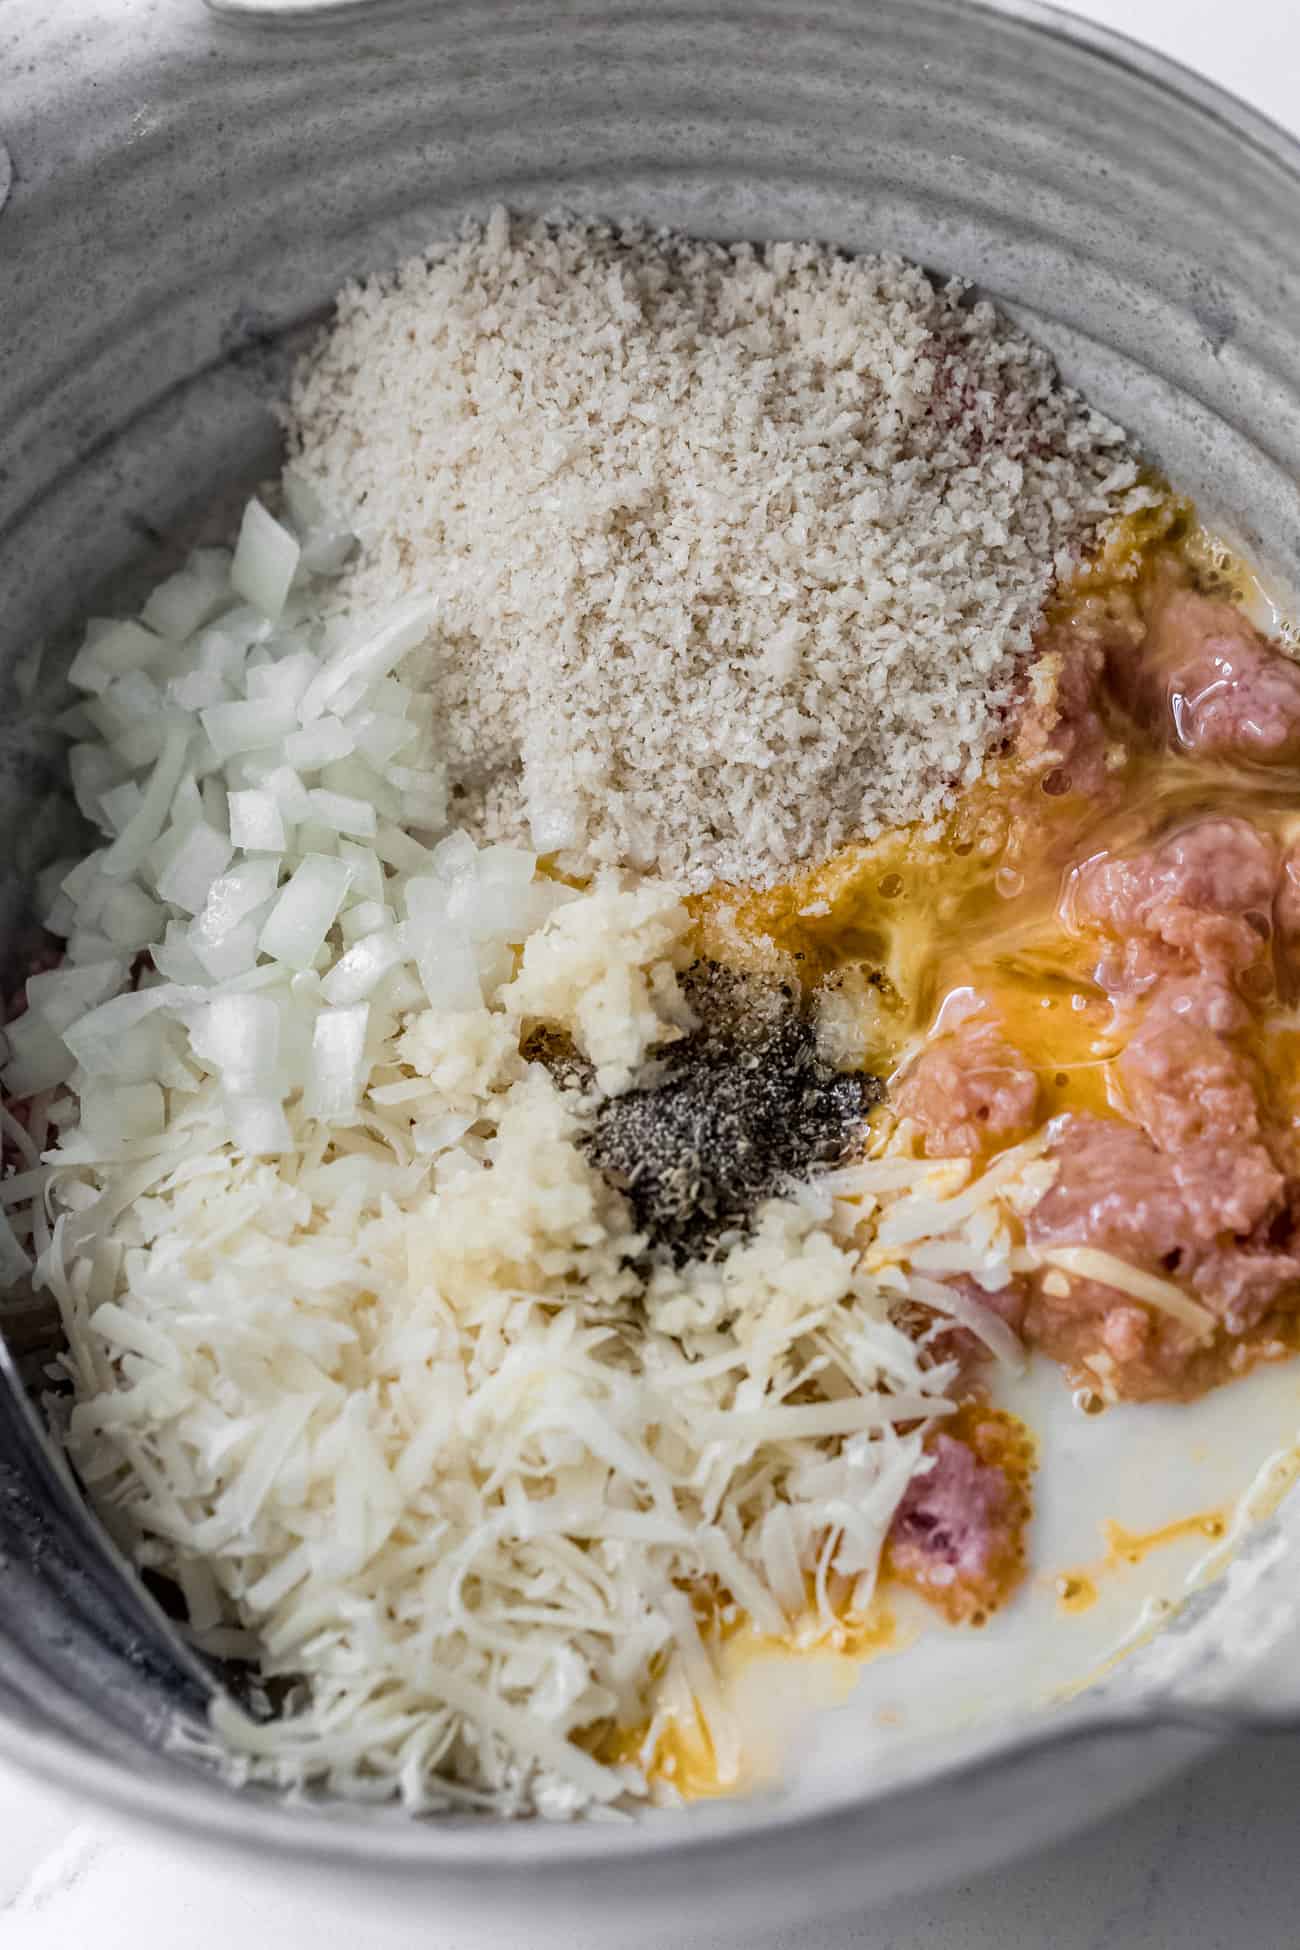 meatball ingredients all together in a ceramic bowl